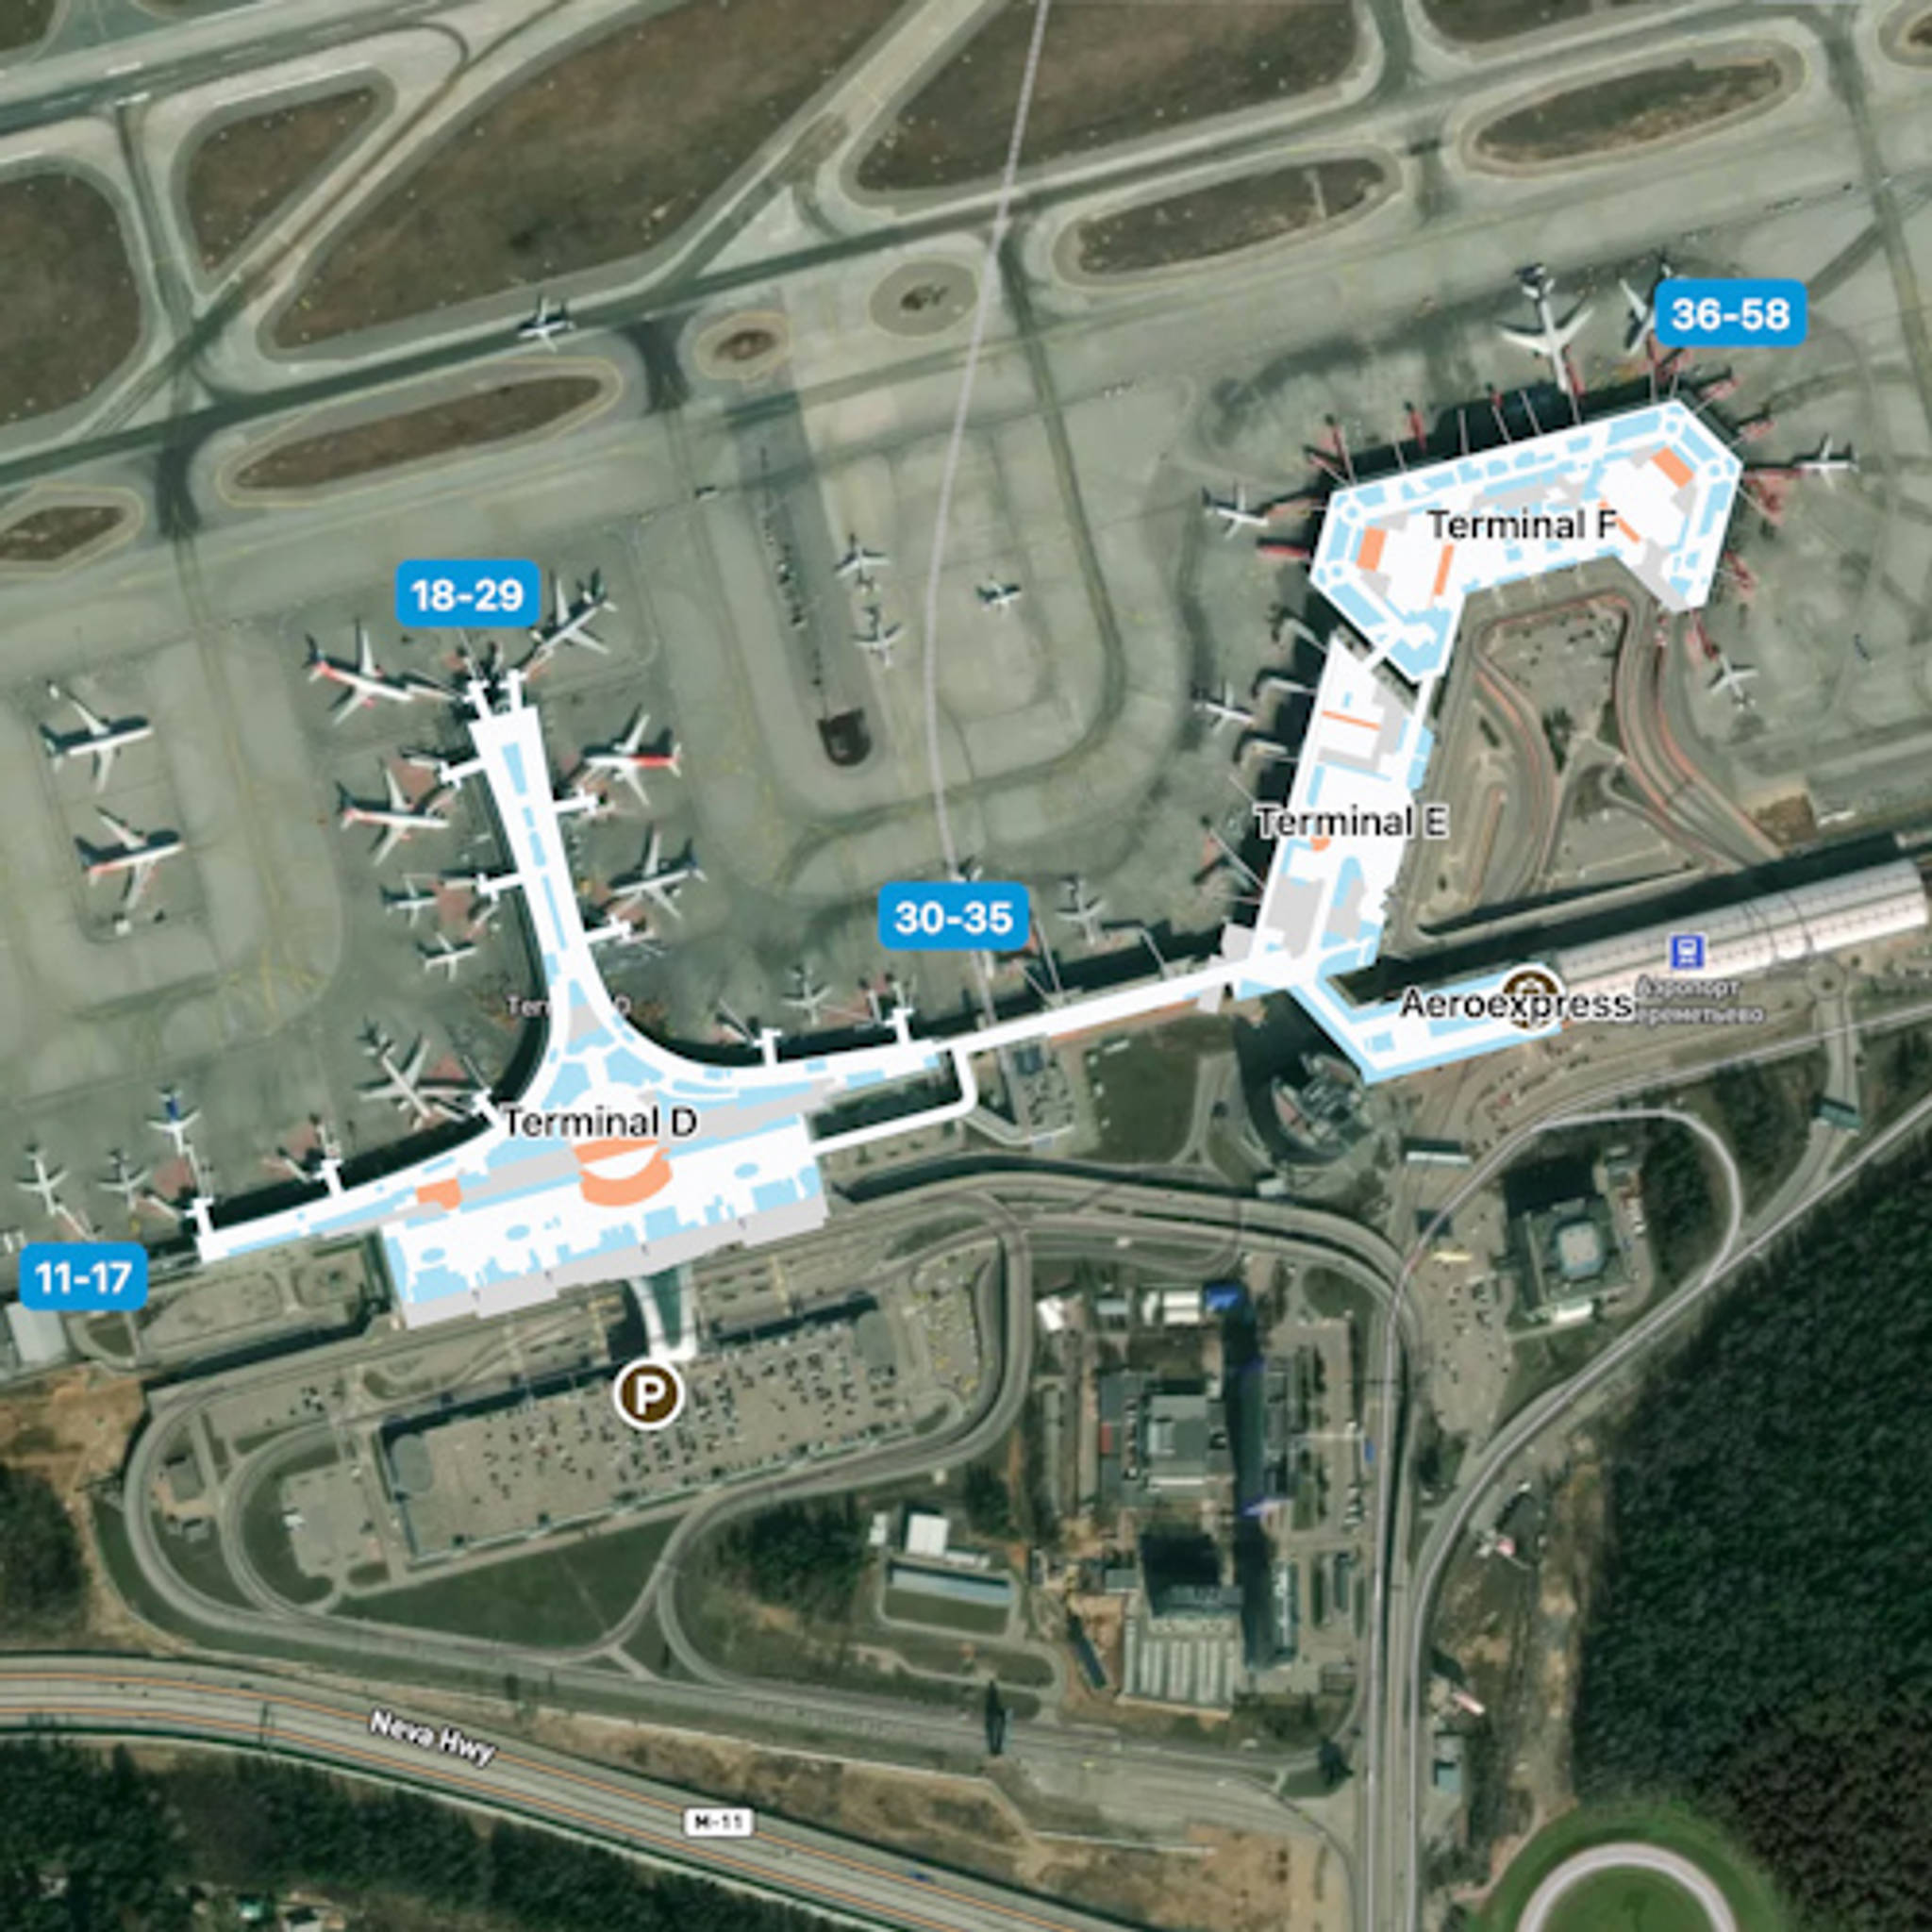 Moscow Sheremetyevo Airport SVO Terminal Overview Map